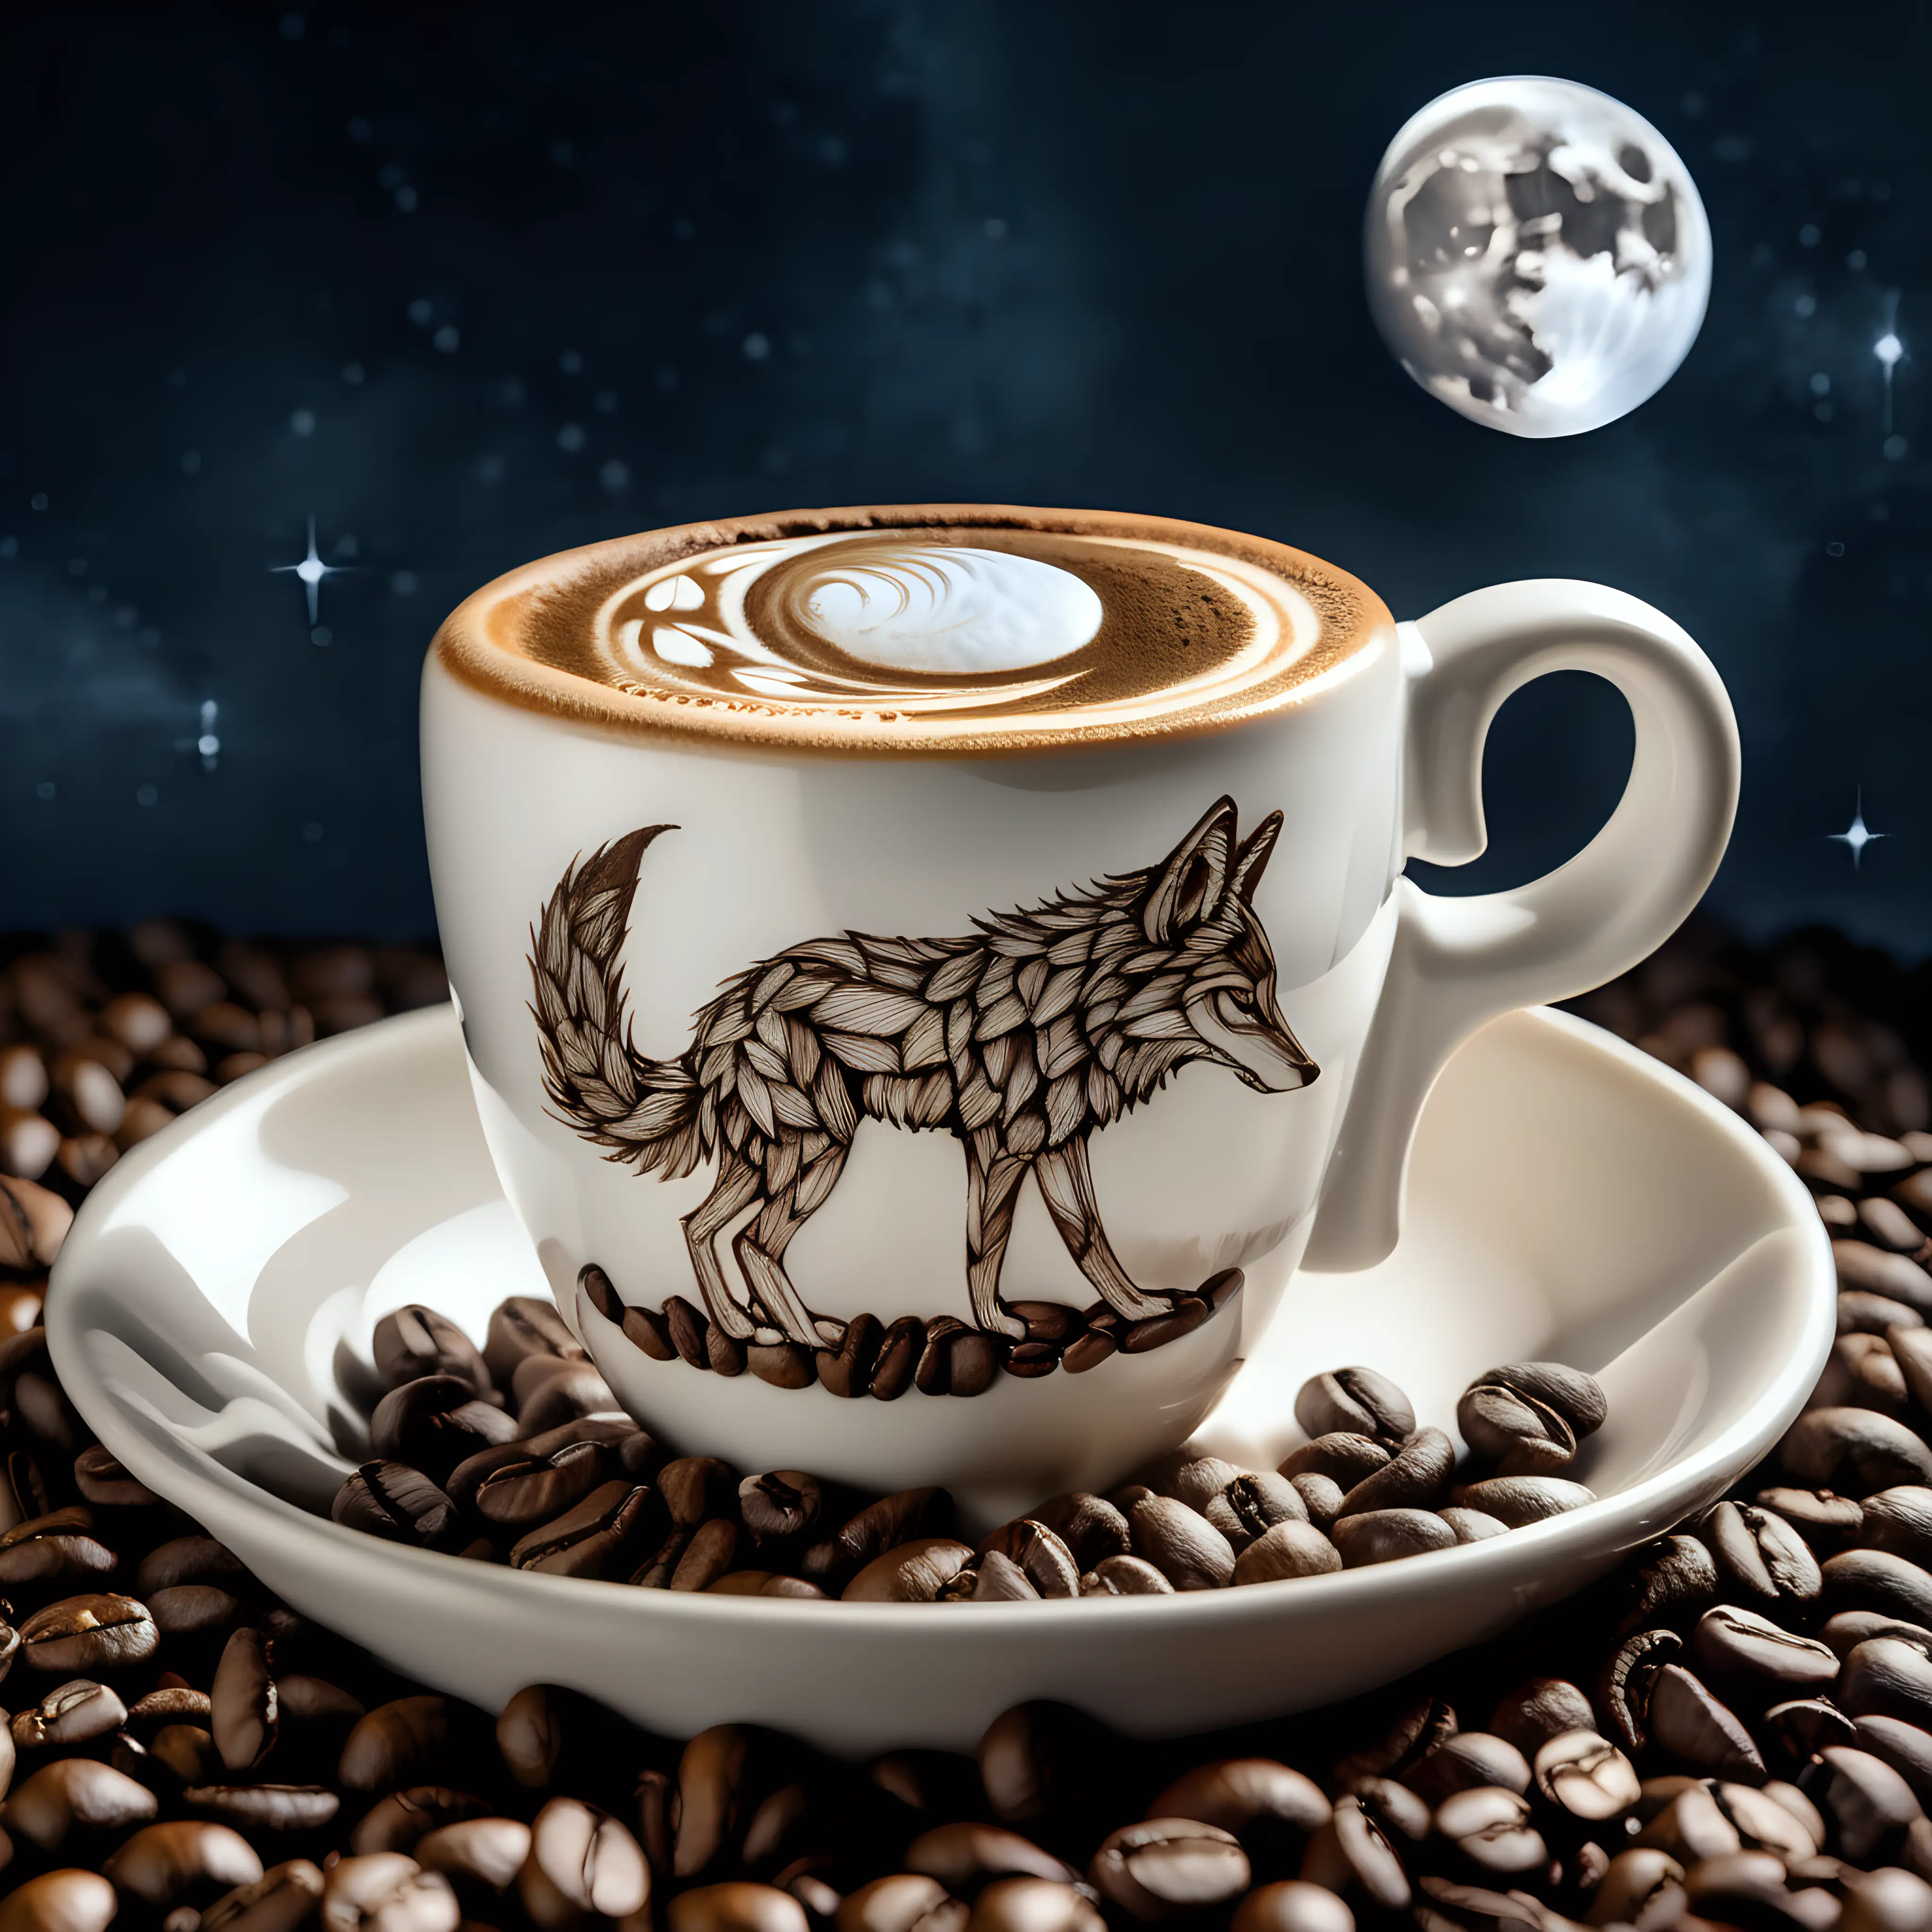 Howling Coyote Formed by Roasted Coffee Grains in Full Moon Latte Art